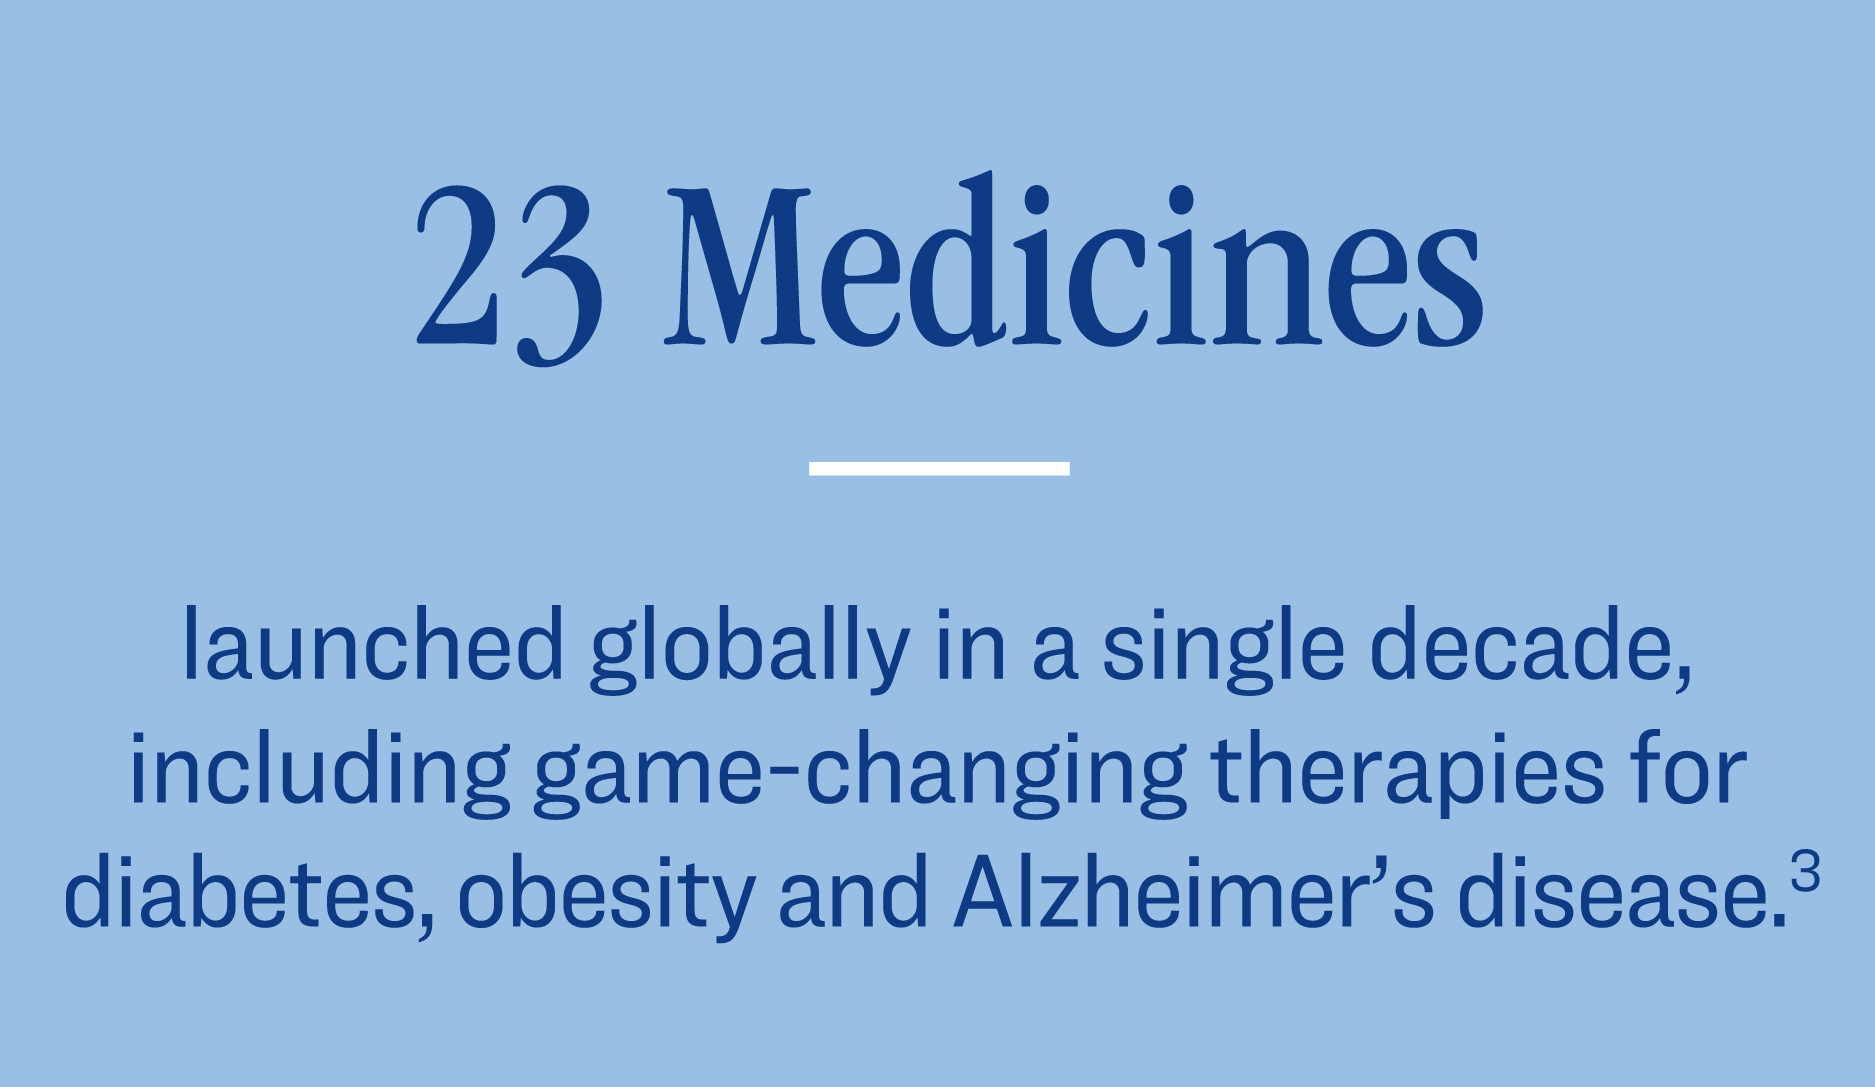 23 Medicines launched globally in a single decade, including game-changing therapies for diabetes, obesity and Alzheimer's disease. 